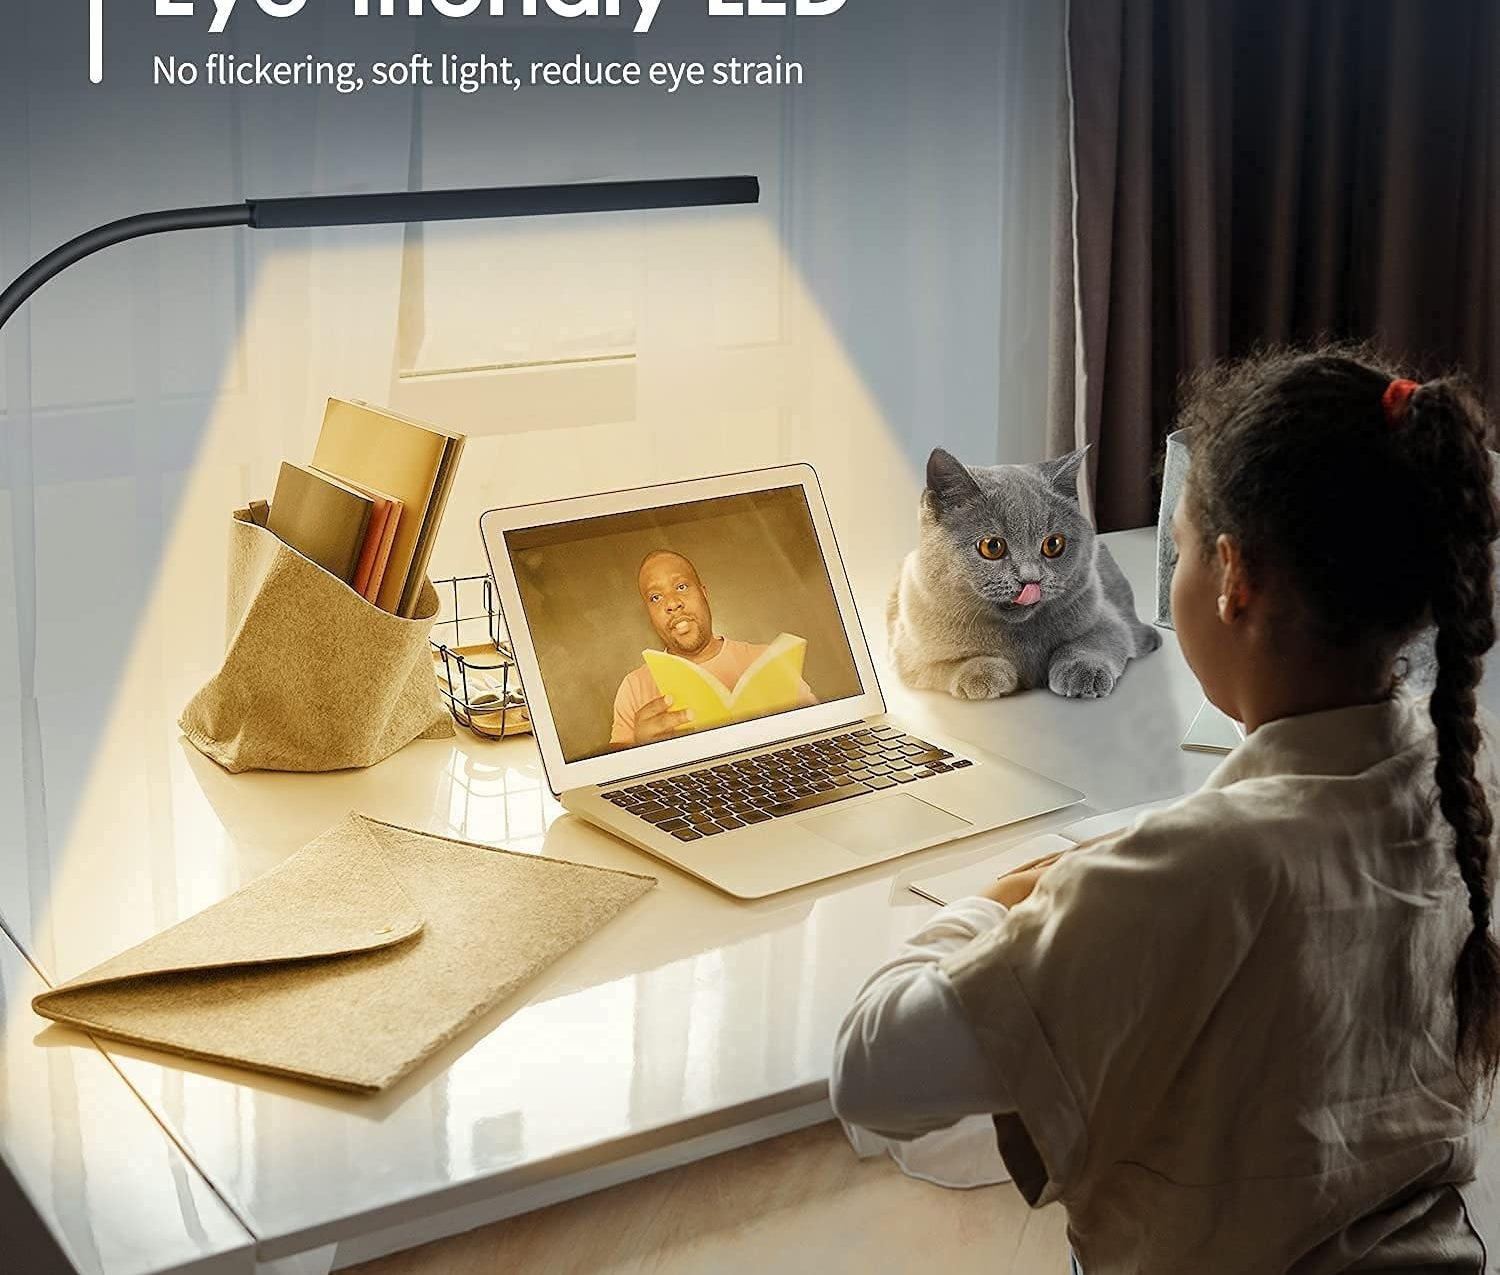 A child sits at a desk with a laptop, school supplies, and a cat sitting on it while they are on a video call with an adult